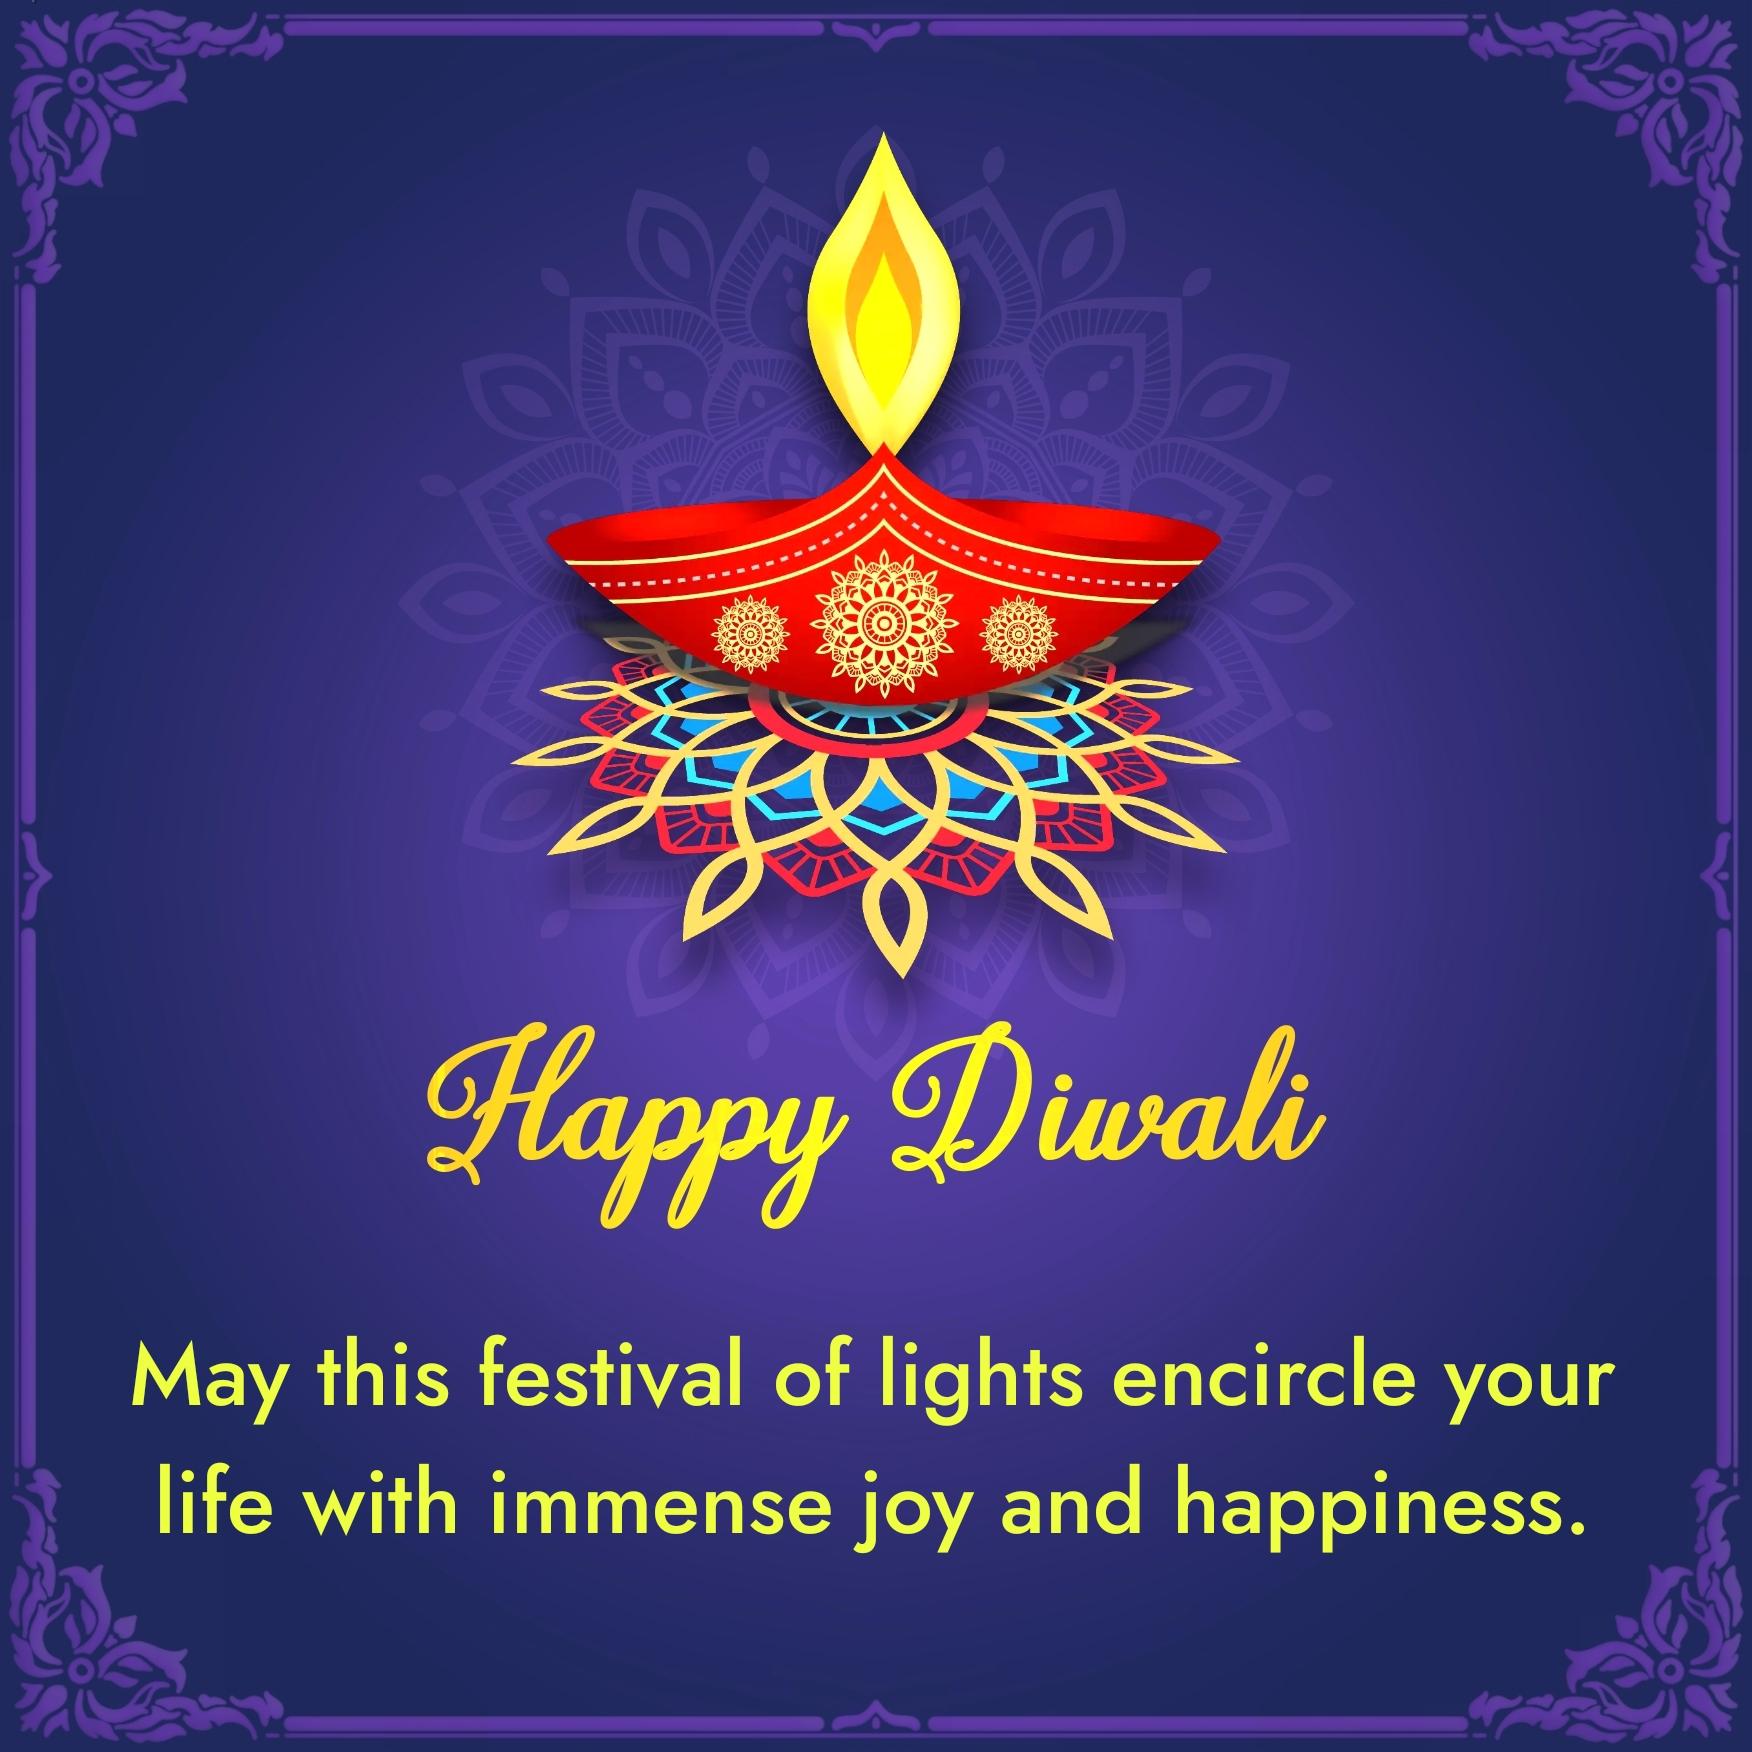 May this festival of lights encircle your life with immense joy